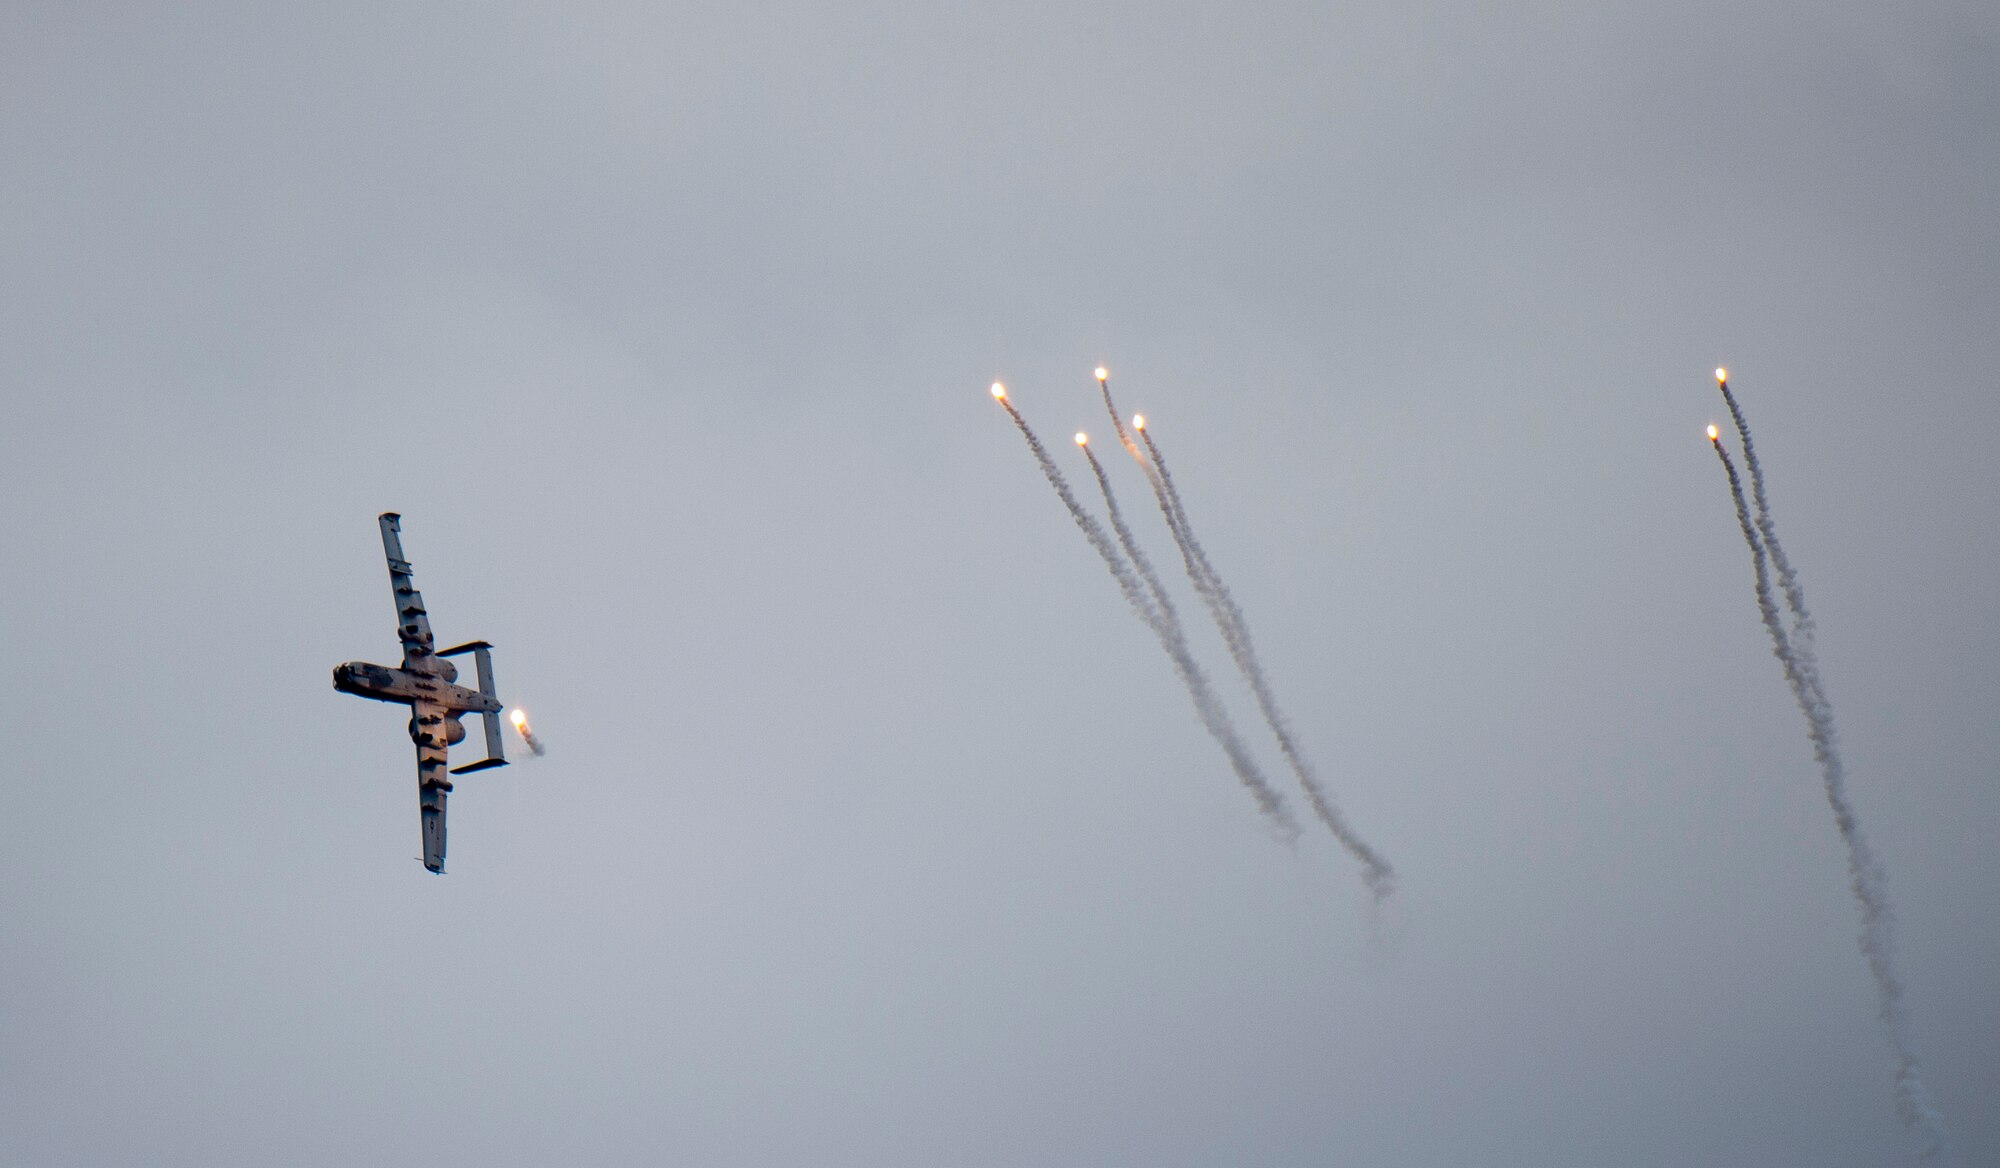 An A-10 Thunderbolt II releases flares over Grand Bay Bombing and Gunnery Range at Moody Air Force Base, Ga., Mar. 4, 2016. Multiple U.S. Air Force aircraft within Air Combat Command conducted joint aerial training that showcased the aircrafts tactical air and ground maneuvers, as well as its weapons capabilities. (U.S. Air Force photo by Staff Sgt. Brian J. Valencia/Released)